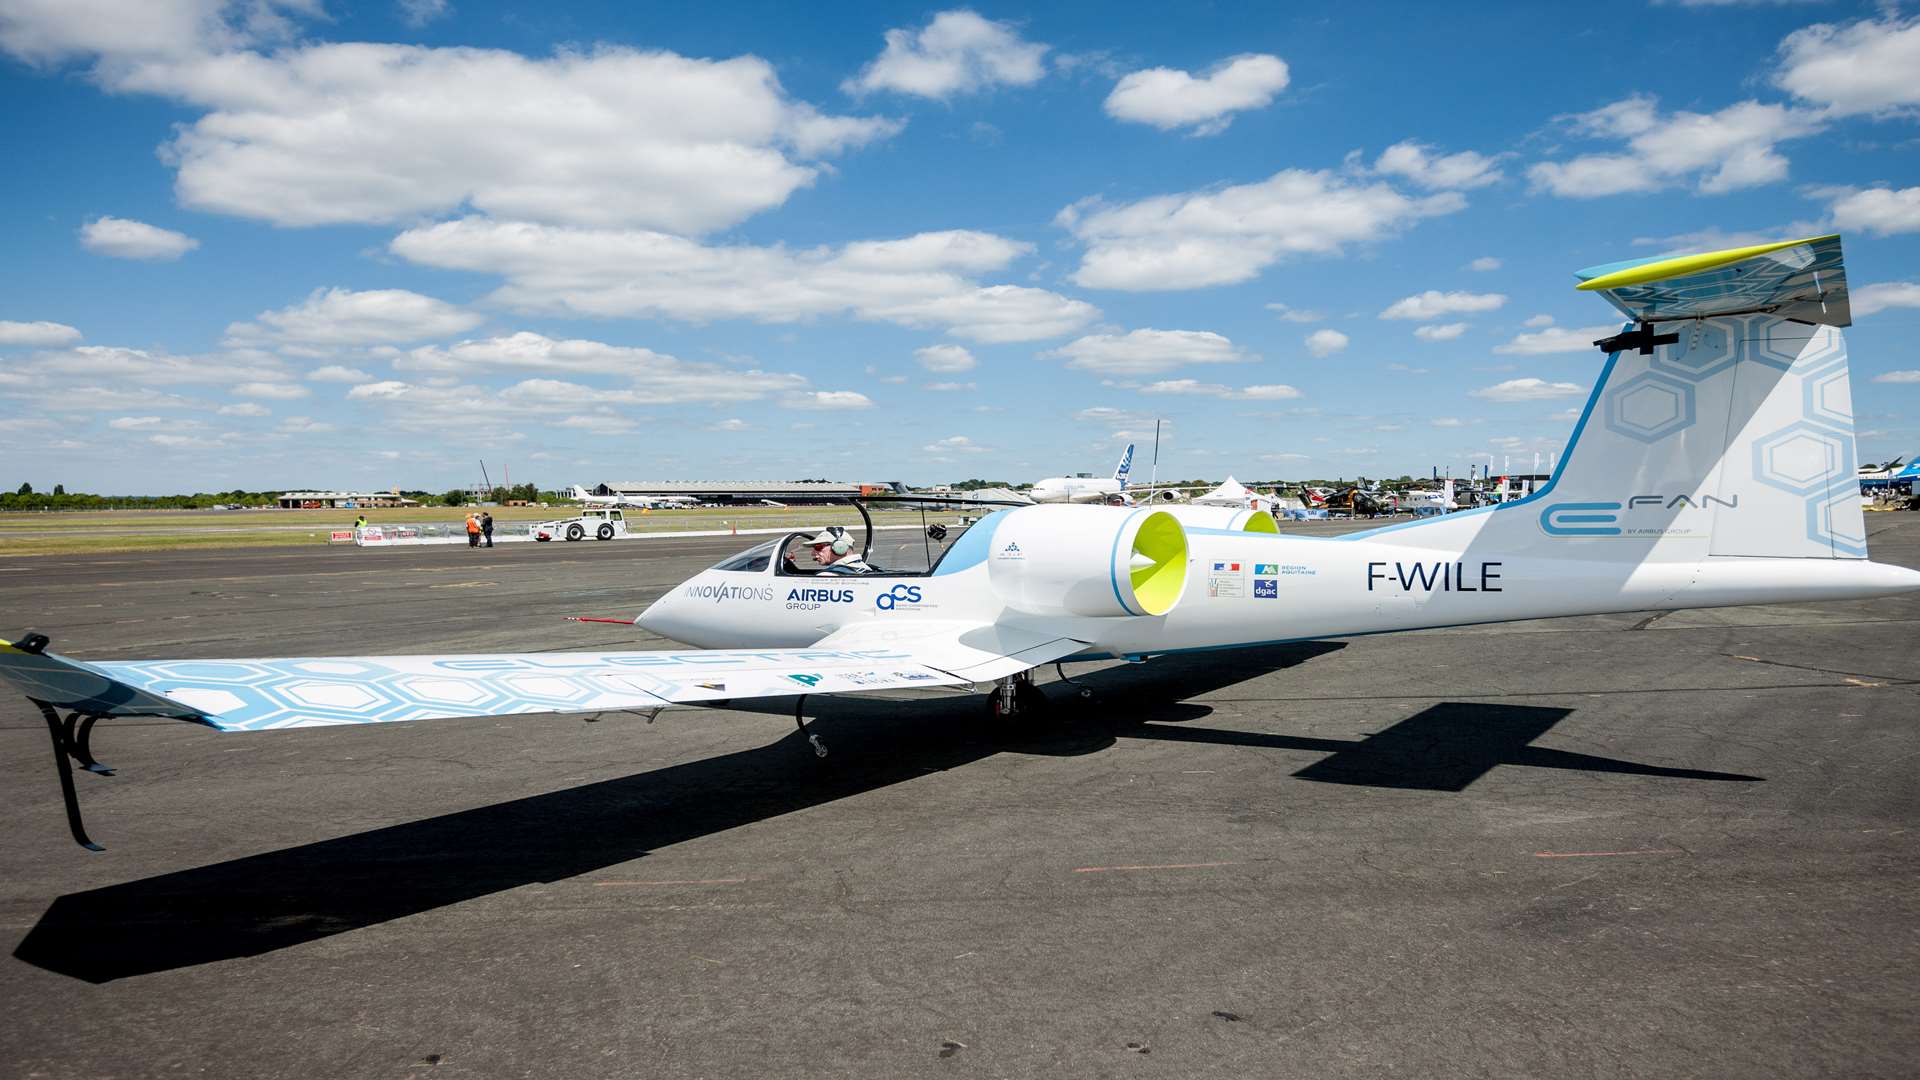 The pioneering new electric plane being launched at Lydd Airport